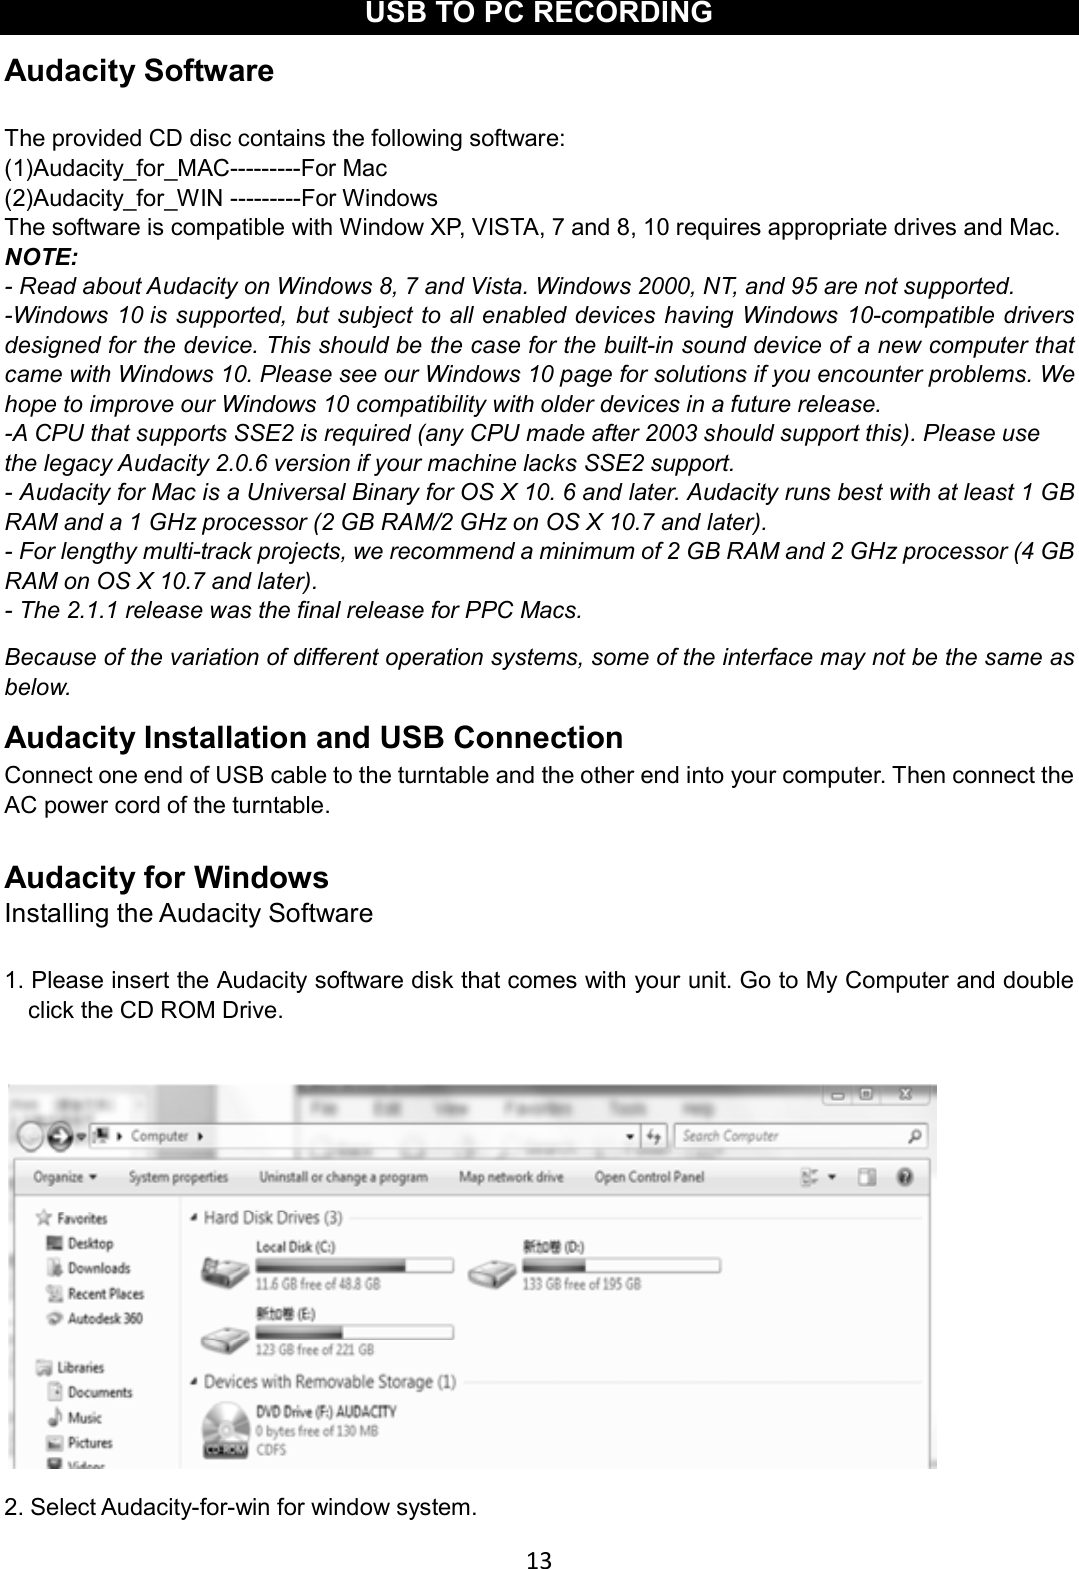 13    USB TO PC RECORDING Audacity Software  The provided CD disc contains the following software: (1)Audacity_for_MAC---------For Mac (2)Audacity_for_WIN ---------For Windows   The software is compatible with Window XP, VISTA, 7 and 8, 10 requires appropriate drives and Mac. NOTE:  - Read about Audacity on Windows 8, 7 and Vista. Windows 2000, NT, and 95 are not supported. -Windows 10 is supported, but subject to all enabled devices having Windows 10-compatible drivers designed for the device. This should be the case for the built-in sound device of a new computer that came with Windows 10. Please see our Windows 10 page for solutions if you encounter problems. We hope to improve our Windows 10 compatibility with older devices in a future release. -A CPU that supports SSE2 is required (any CPU made after 2003 should support this). Please use the legacy Audacity 2.0.6 version if your machine lacks SSE2 support. - Audacity for Mac is a Universal Binary for OS X 10. 6 and later. Audacity runs best with at least 1 GB RAM and a 1 GHz processor (2 GB RAM/2 GHz on OS X 10.7 and later). - For lengthy multi-track projects, we recommend a minimum of 2 GB RAM and 2 GHz processor (4 GB RAM on OS X 10.7 and later). - The 2.1.1 release was the final release for PPC Macs. Because of the variation of different operation systems, some of the interface may not be the same as below. Audacity Installation and USB Connection Connect one end of USB cable to the turntable and the other end into your computer. Then connect the AC power cord of the turntable.  Audacity for Windows Installing the Audacity Software  1. Please insert the Audacity software disk that comes with your unit. Go to My Computer and double click the CD ROM Drive.   2. Select Audacity-for-win for window system. 